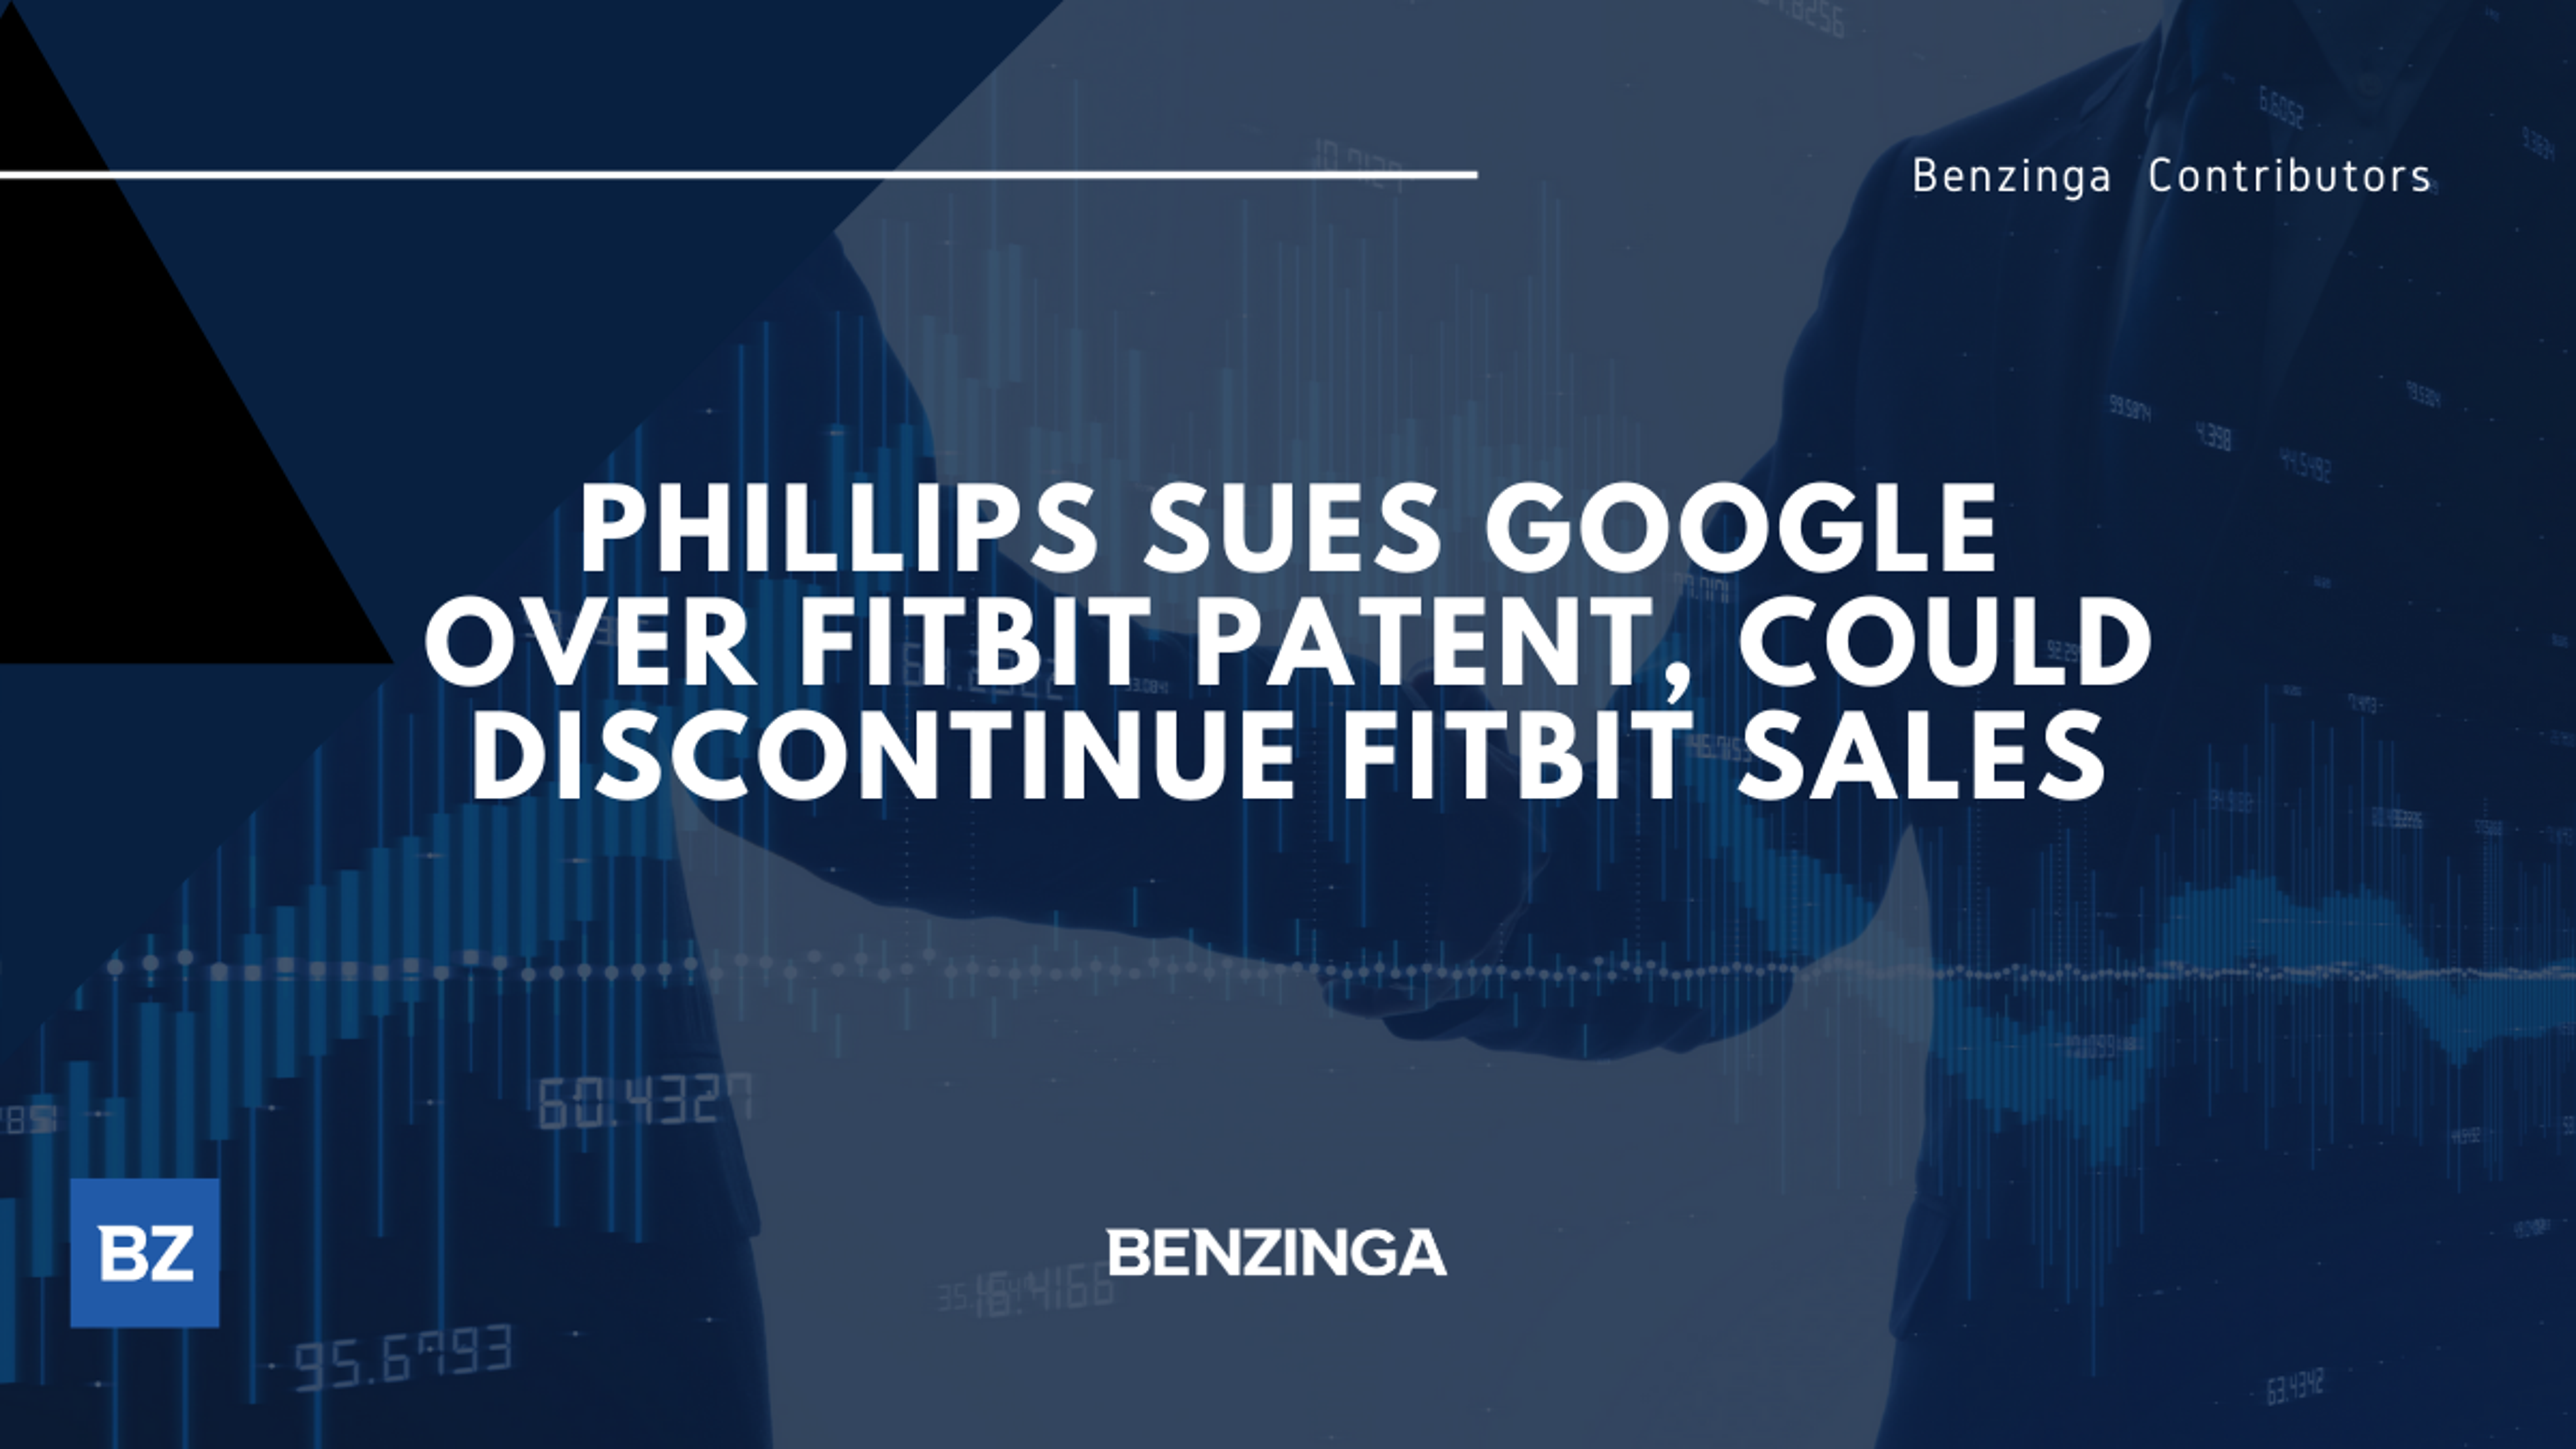 Phillips Sues Google Over FitBit Patent, Could Discontinue FitBit Sales